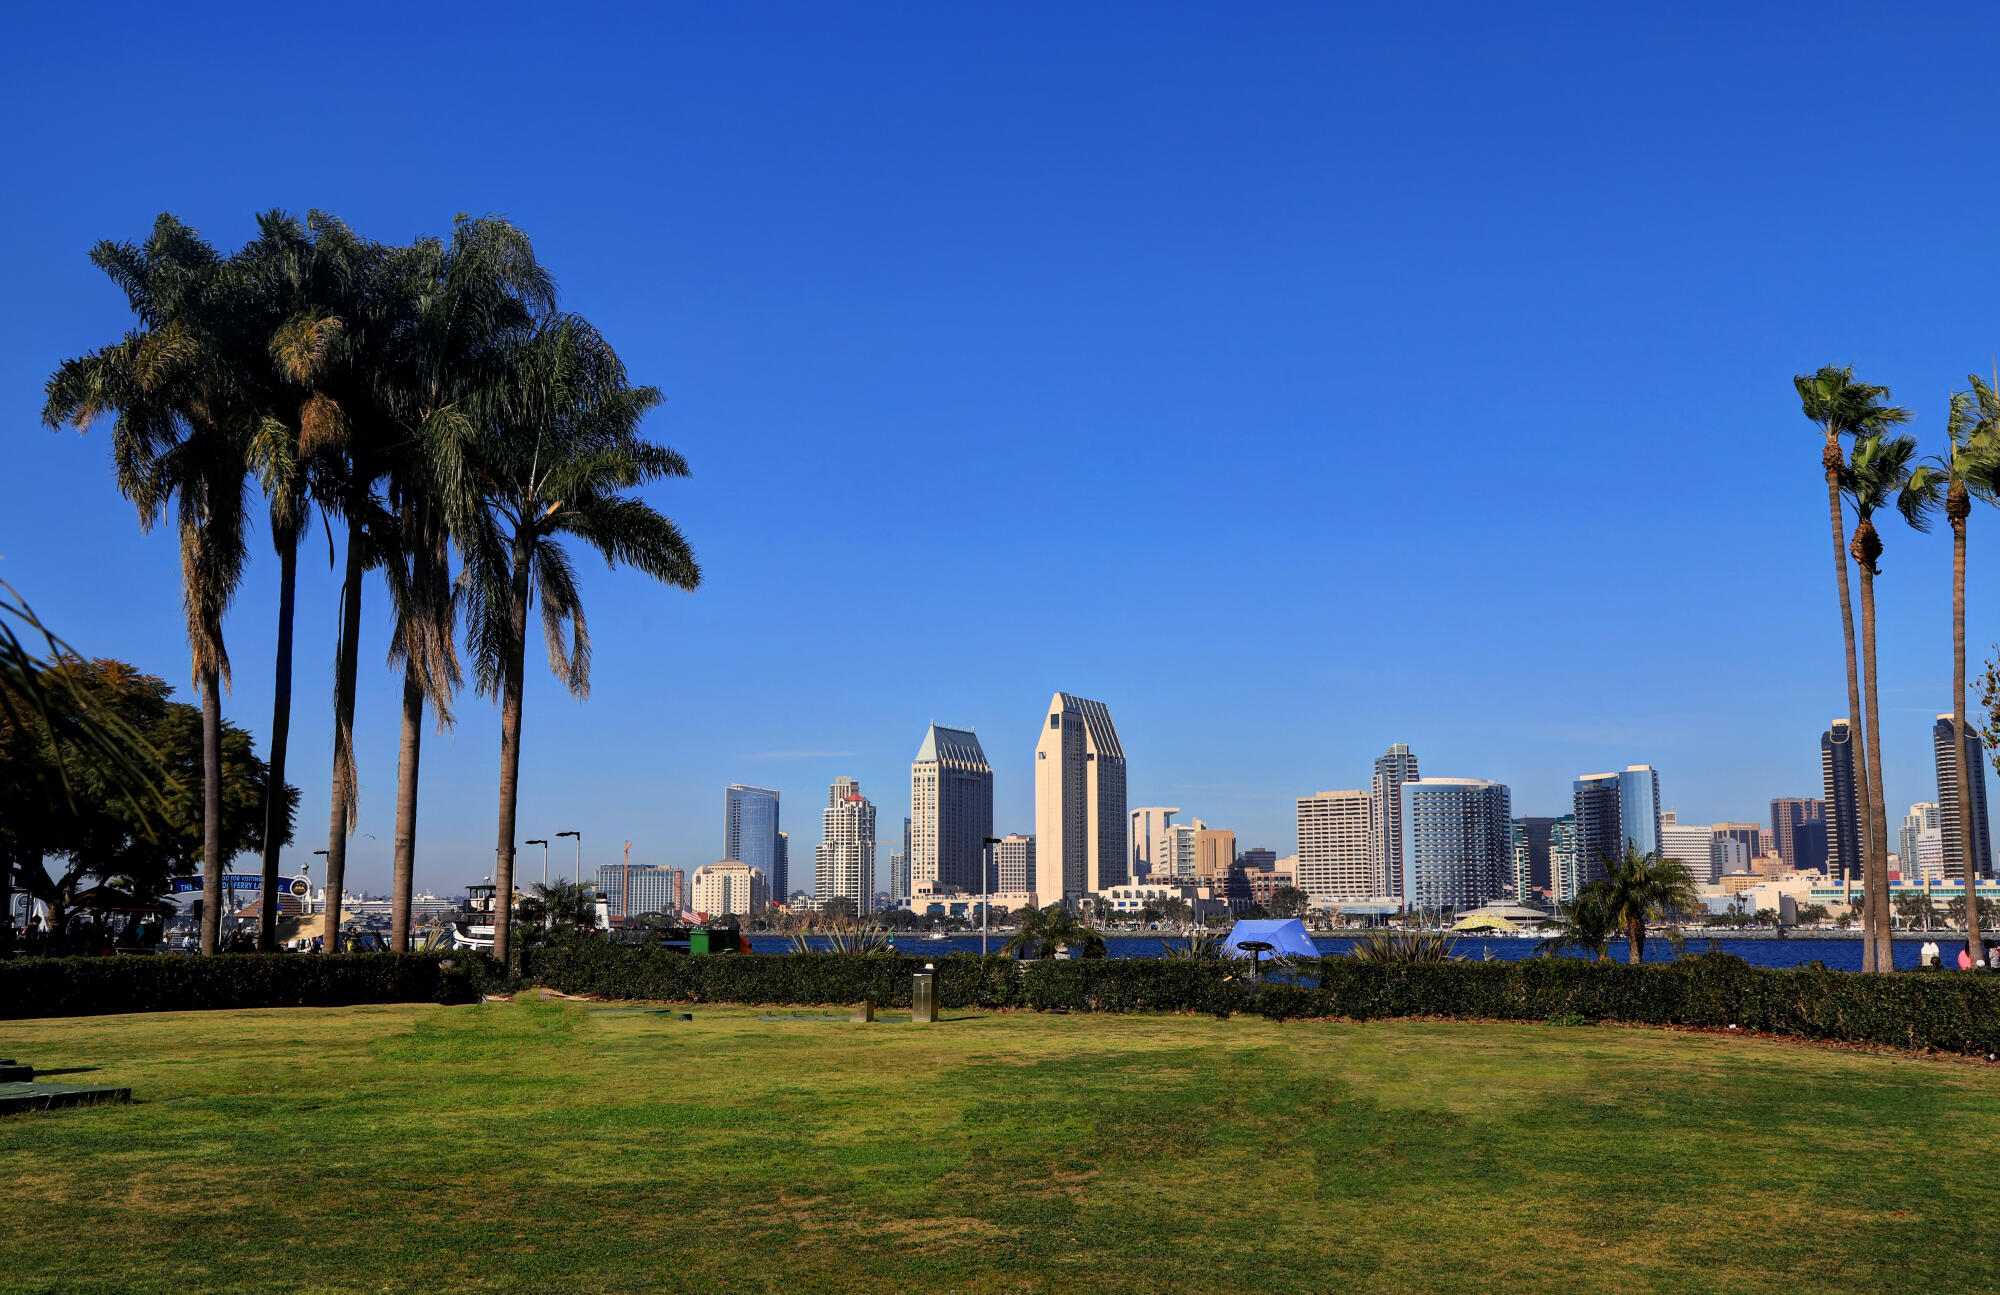 Property Marketing Tips to Attract Tenants in a Tough San Diego, CA Market